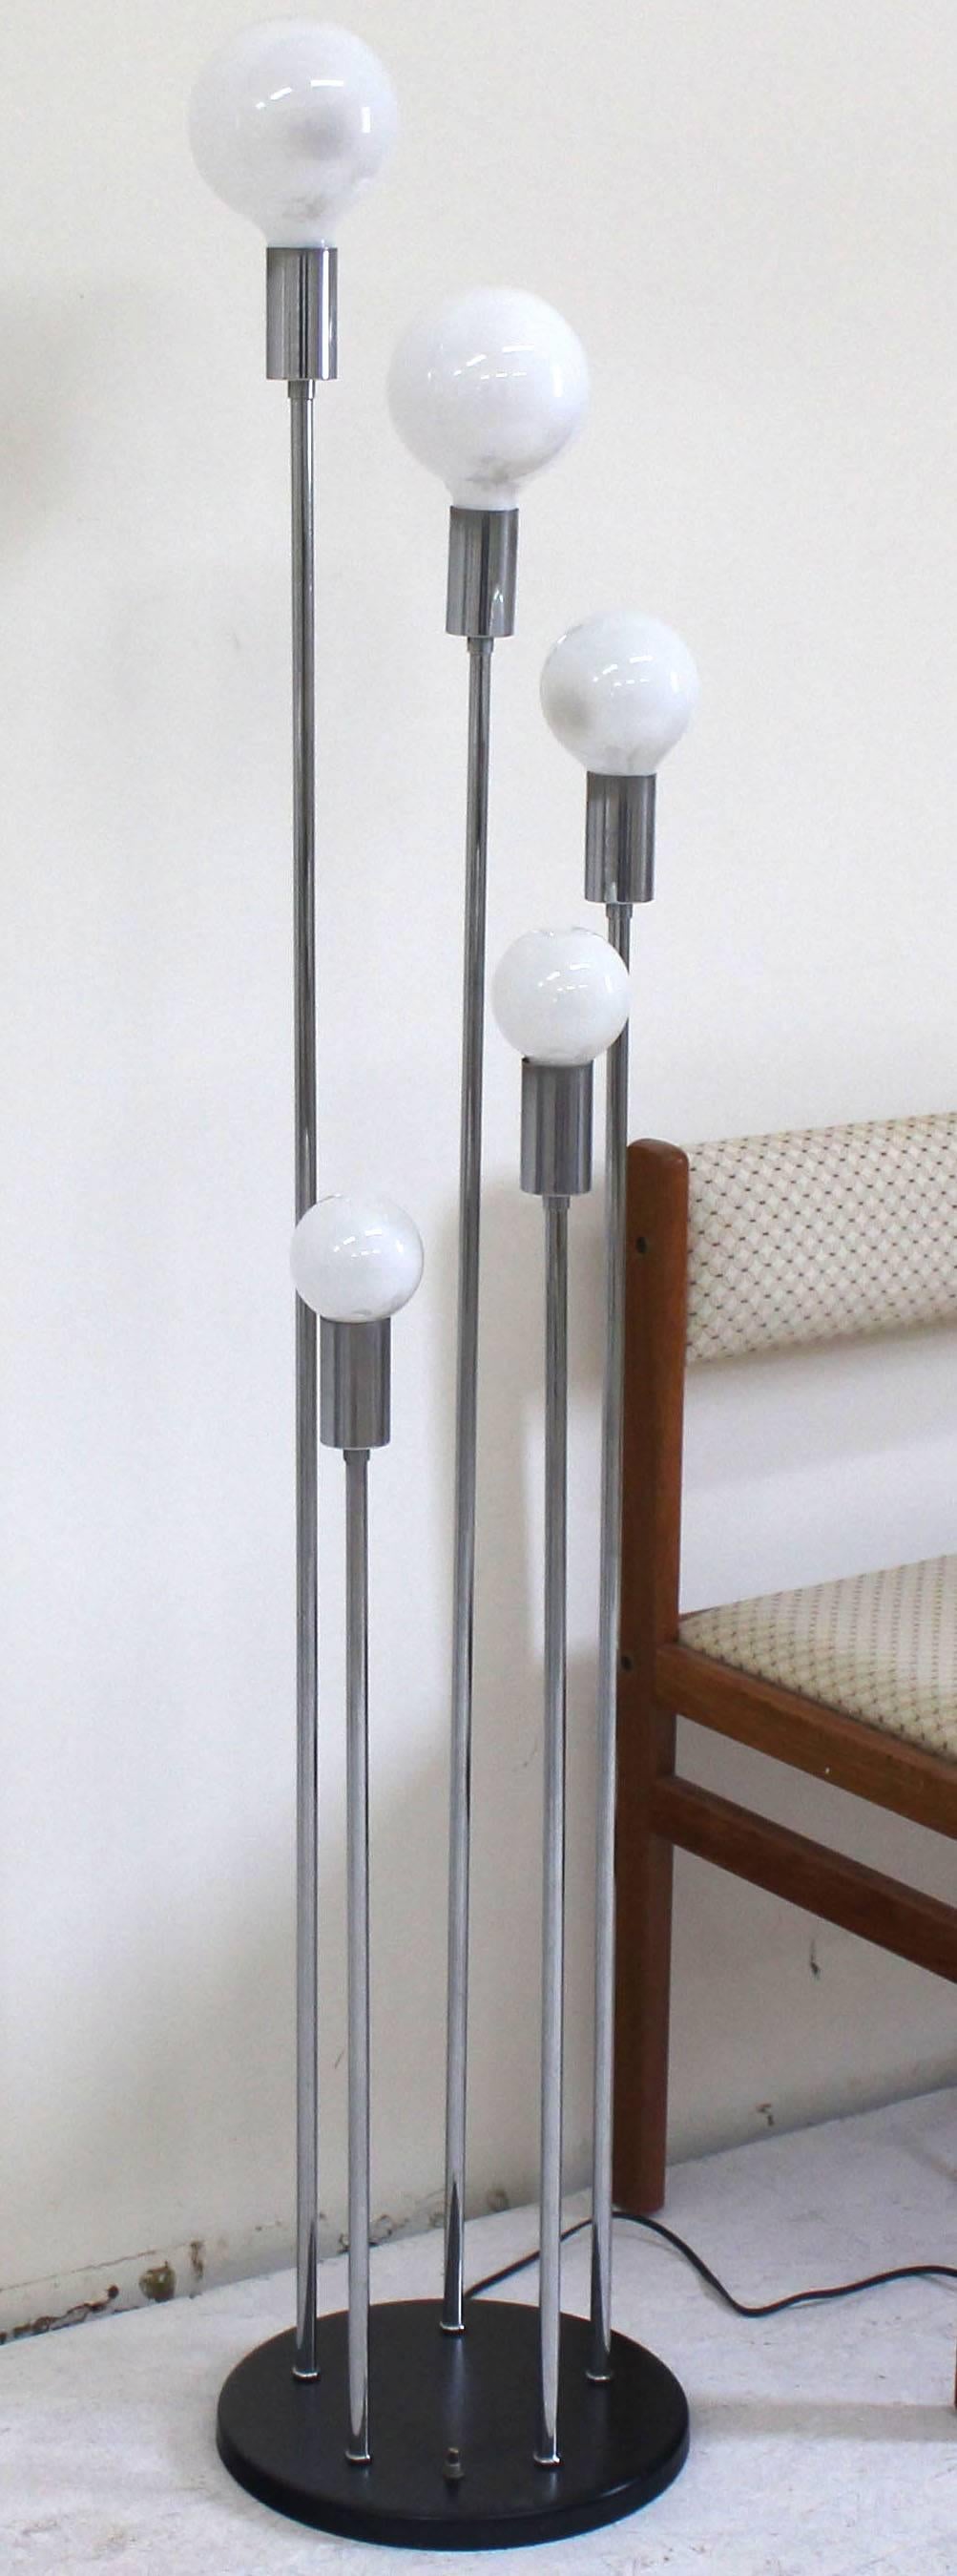 3 Way mid century modern chrome floor lamp with globe shades lamps.